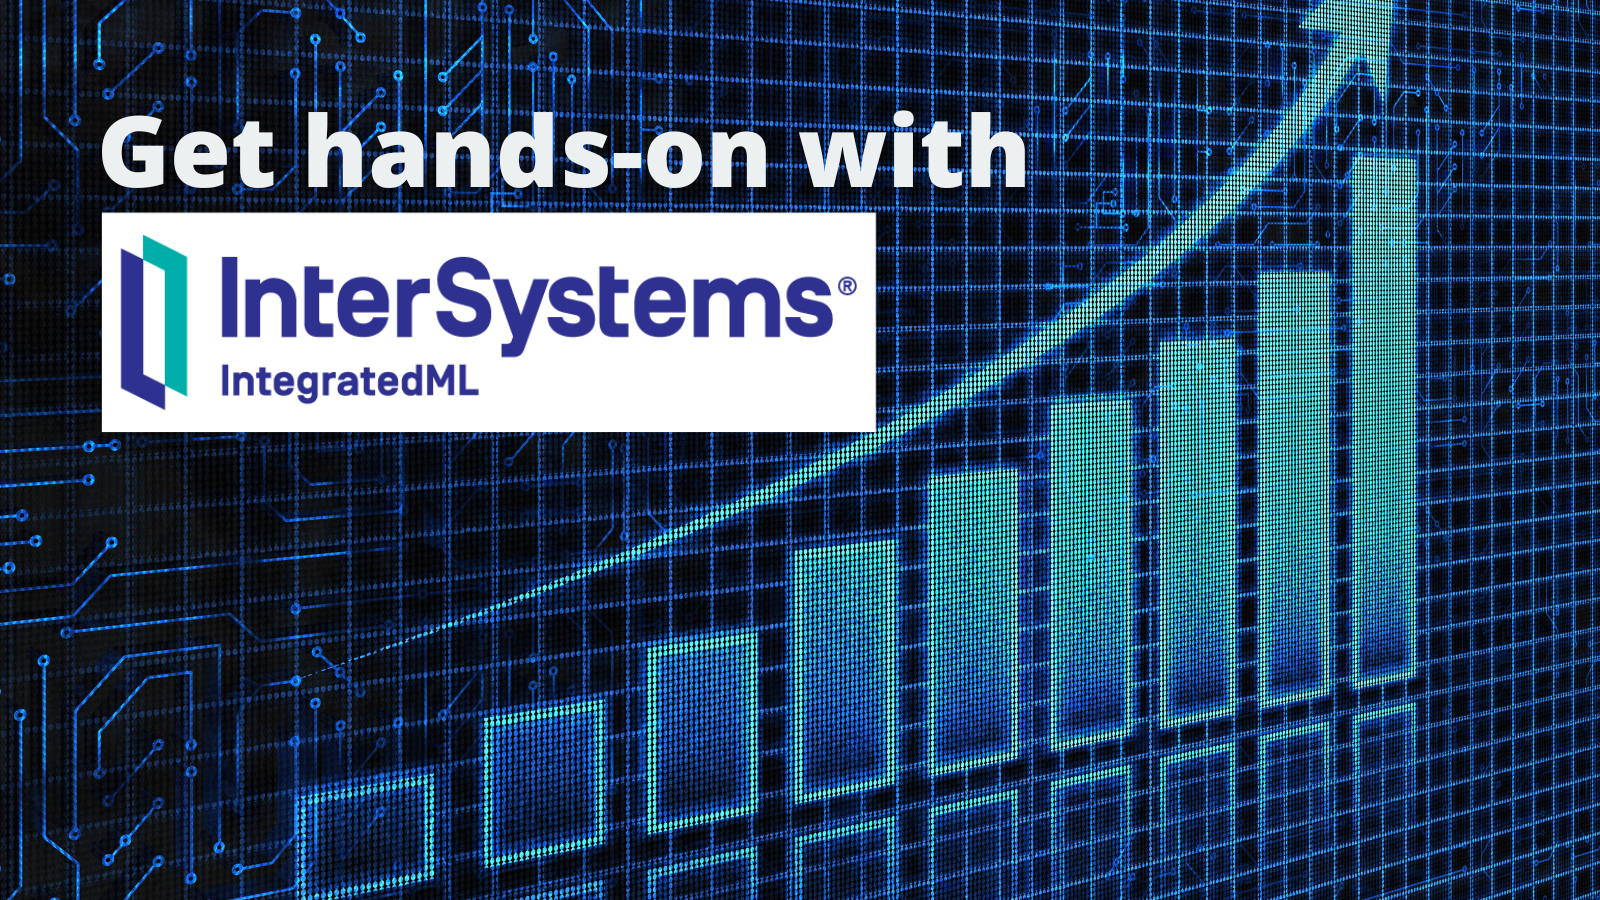 Get hands-on with InterSystems IntegratedML